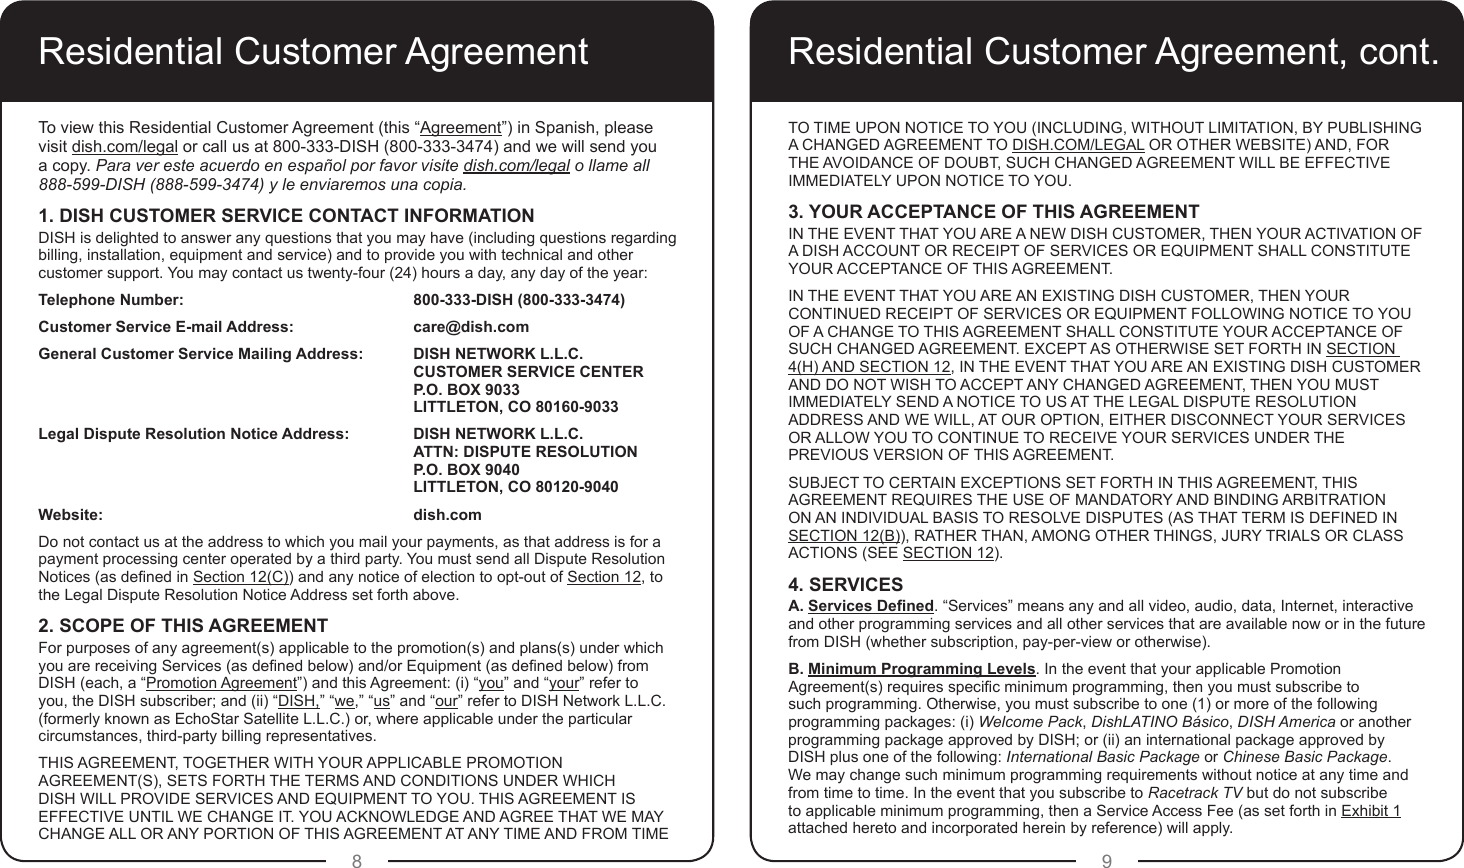 8 9Residential Customer AgreementTo view this Residential Customer Agreement (this “Agreement”) in Spanish, please visit dish.com/legal or call us at 800-333-DISH (800-333-3474) and we will send you  a copy. Para ver este acuerdo en español por favor visite dish.com/legal o llame all  888-599-DISH (888-599-3474) y le enviaremos una copia.1. DISH CUSTOMER SERVICE CONTACT INFORMATIONDISH is delighted to answer any questions that you may have (including questions regarding billing, installation, equipment and service) and to provide you with technical and other customer support. You may contact us twenty-four (24) hours a day, any day of the year:Telephone Number:        800-333-DISH (800-333-3474)Customer Service E-mail Address:     care@dish.comGeneral Customer Service Mailing Address:  DISH NETWORK L.L.C.     CUSTOMER SERVICE CENTER      P.O. BOX 9033      LITTLETON, CO 80160-9033Legal Dispute Resolution Notice Address:  DISH NETWORK L.L.C.     ATTN: DISPUTE RESOLUTION     P.O. BOX 9040        LITTLETON, CO 80120-9040Website:           dish.comDo not contact us at the address to which you mail your payments, as that address is for a payment processing center operated by a third party. You must send all Dispute Resolution Notices (as dened in Section 12(C)) and any notice of election to opt-out of Section 12, to the Legal Dispute Resolution Notice Address set forth above.2. SCOPE OF THIS AGREEMENTFor purposes of any agreement(s) applicable to the promotion(s) and plans(s) under which you are receiving Services (as dened below) and/or Equipment (as dened below) from DISH (each, a “Promotion Agreement”) and this Agreement: (i) “you” and “your” refer to you, the DISH subscriber; and (ii) “DISH,” “we,” “us” and “our” refer to DISH Network L.L.C. (formerly known as EchoStar Satellite L.L.C.) or, where applicable under the particular circumstances, third-party billing representatives.THIS AGREEMENT, TOGETHER WITH YOUR APPLICABLE PROMOTION AGREEMENT(S), SETS FORTH THE TERMS AND CONDITIONS UNDER WHICH DISH WILL PROVIDE SERVICES AND EQUIPMENT TO YOU. THIS AGREEMENT IS EFFECTIVE UNTIL WE CHANGE IT. YOU ACKNOWLEDGE AND AGREE THAT WE MAY CHANGE ALL OR ANY PORTION OF THIS AGREEMENT AT ANY TIME AND FROM TIME TO TIME UPON NOTICE TO YOU (INCLUDING, WITHOUT LIMITATION, BY PUBLISHING A CHANGED AGREEMENT TO DISH.COM/LEGAL OR OTHER WEBSITE) AND, FOR THE AVOIDANCE OF DOUBT, SUCH CHANGED AGREEMENT WILL BE EFFECTIVE IMMEDIATELY UPON NOTICE TO YOU.3. YOUR ACCEPTANCE OF THIS AGREEMENTIN THE EVENT THAT YOU ARE A NEW DISH CUSTOMER, THEN YOUR ACTIVATION OF A DISH ACCOUNT OR RECEIPT OF SERVICES OR EQUIPMENT SHALL CONSTITUTE YOUR ACCEPTANCE OF THIS AGREEMENT. IN THE EVENT THAT YOU ARE AN EXISTING DISH CUSTOMER, THEN YOUR CONTINUED RECEIPT OF SERVICES OR EQUIPMENT FOLLOWING NOTICE TO YOU OF A CHANGE TO THIS AGREEMENT SHALL CONSTITUTE YOUR ACCEPTANCE OF SUCH CHANGED AGREEMENT. EXCEPT AS OTHERWISE SET FORTH IN SECTION 4(H) AND SECTION 12, IN THE EVENT THAT YOU ARE AN EXISTING DISH CUSTOMER AND DO NOT WISH TO ACCEPT ANY CHANGED AGREEMENT, THEN YOU MUST IMMEDIATELY SEND A NOTICE TO US AT THE LEGAL DISPUTE RESOLUTION ADDRESS AND WE WILL, AT OUR OPTION, EITHER DISCONNECT YOUR SERVICES OR ALLOW YOU TO CONTINUE TO RECEIVE YOUR SERVICES UNDER THE PREVIOUS VERSION OF THIS AGREEMENT. SUBJECT TO CERTAIN EXCEPTIONS SET FORTH IN THIS AGREEMENT, THIS AGREEMENT REQUIRES THE USE OF MANDATORY AND BINDING ARBITRATION ON AN INDIVIDUAL BASIS TO RESOLVE DISPUTES (AS THAT TERM IS DEFINED IN SECTION 12(B)), RATHER THAN, AMONG OTHER THINGS, JURY TRIALS OR CLASS ACTIONS (SEE SECTION 12).4. SERVICESA. Services Dened. “Services” means any and all video, audio, data, Internet, interactive and other programming services and all other services that are available now or in the future from DISH (whether subscription, pay-per-view or otherwise). B. Minimum Programming Levels. In the event that your applicable Promotion Agreement(s) requires specic minimum programming, then you must subscribe to such programming. Otherwise, you must subscribe to one (1) or more of the following programming packages: (i) Welcome Pack, DishLATINO Básico, DISH America or another programming package approved by DISH; or (ii) an international package approved by DISH plus one of the following: International Basic Package or Chinese Basic Package. We may change such minimum programming requirements without notice at any time and from time to time. In the event that you subscribe to Racetrack TV but do not subscribe to applicable minimum programming, then a Service Access Fee (as set forth in Exhibit 1 attached hereto and incorporated herein by reference) will apply.Residential Customer Agreement, cont.